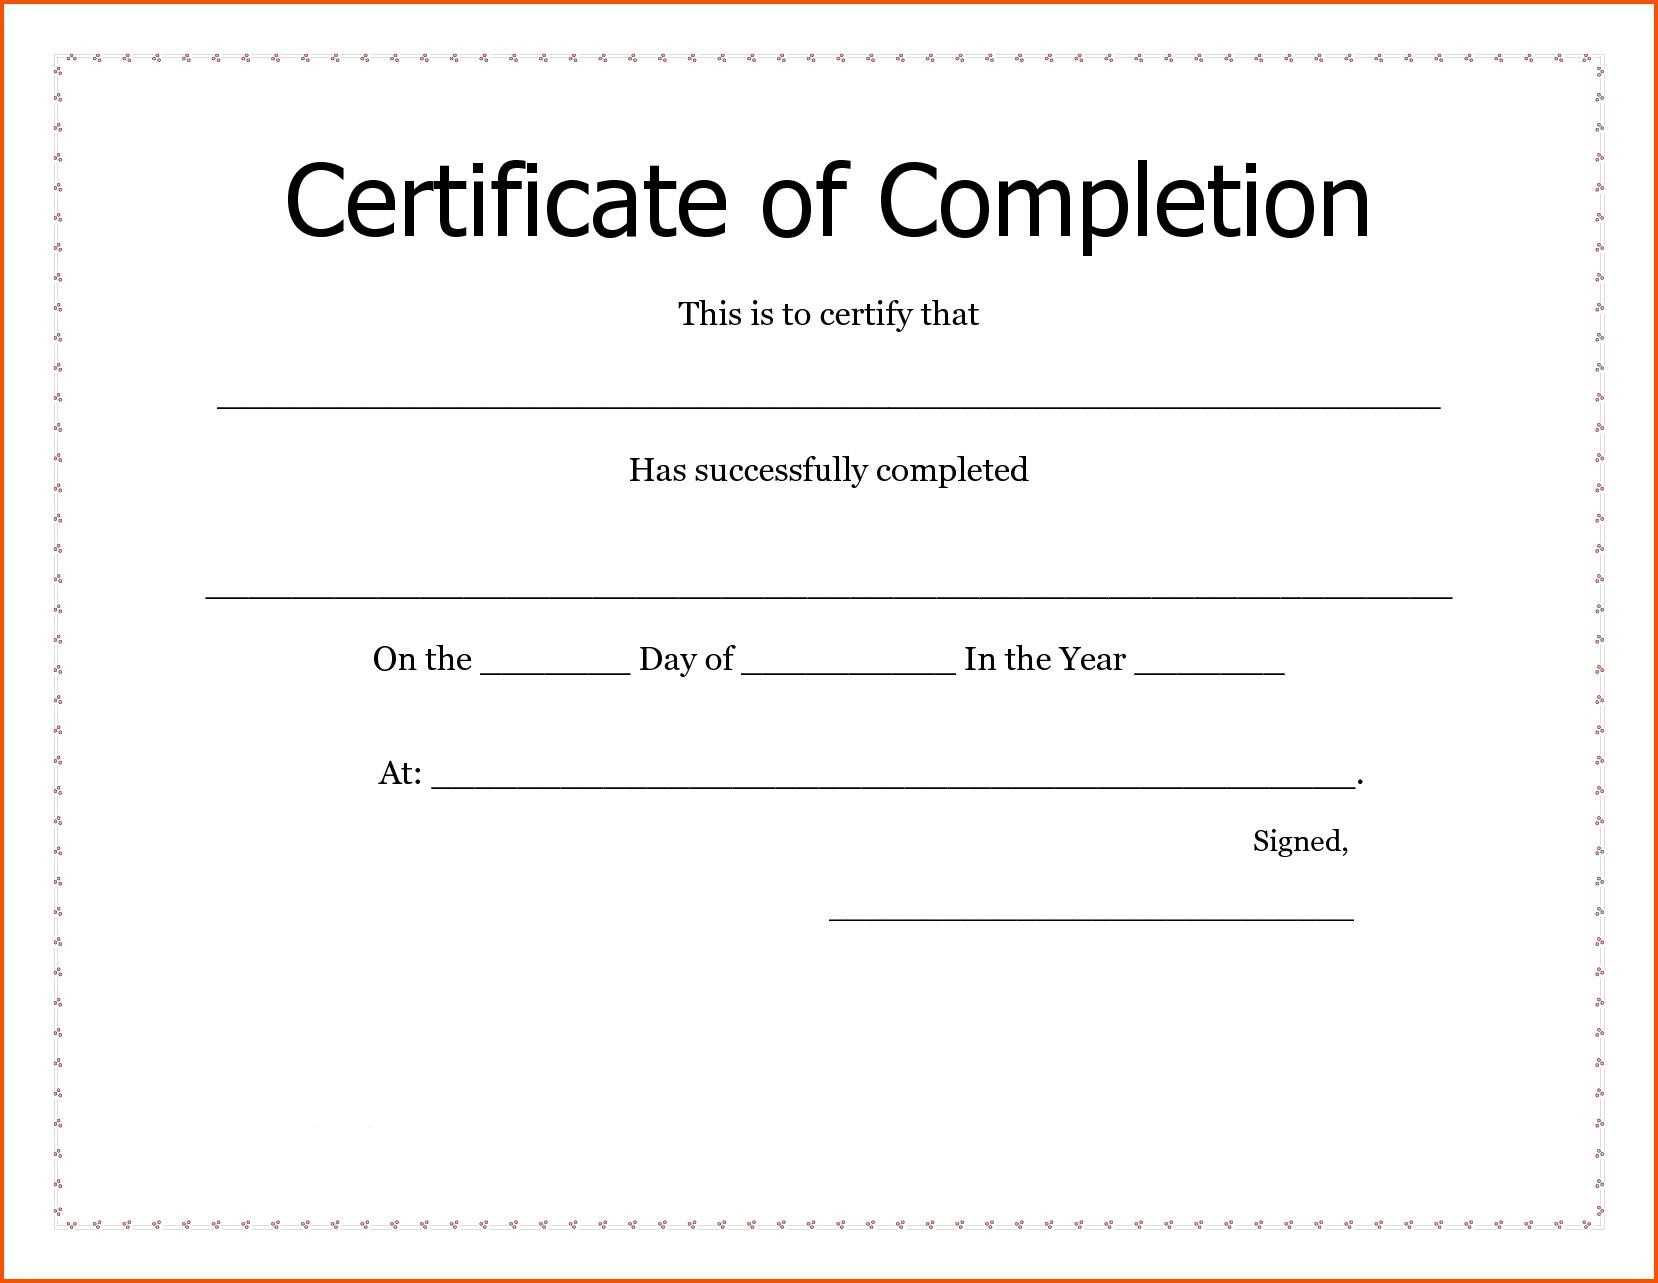 Certificates. New Certificate Of Completion Template Word Regarding Certificate Of Completion Template Word